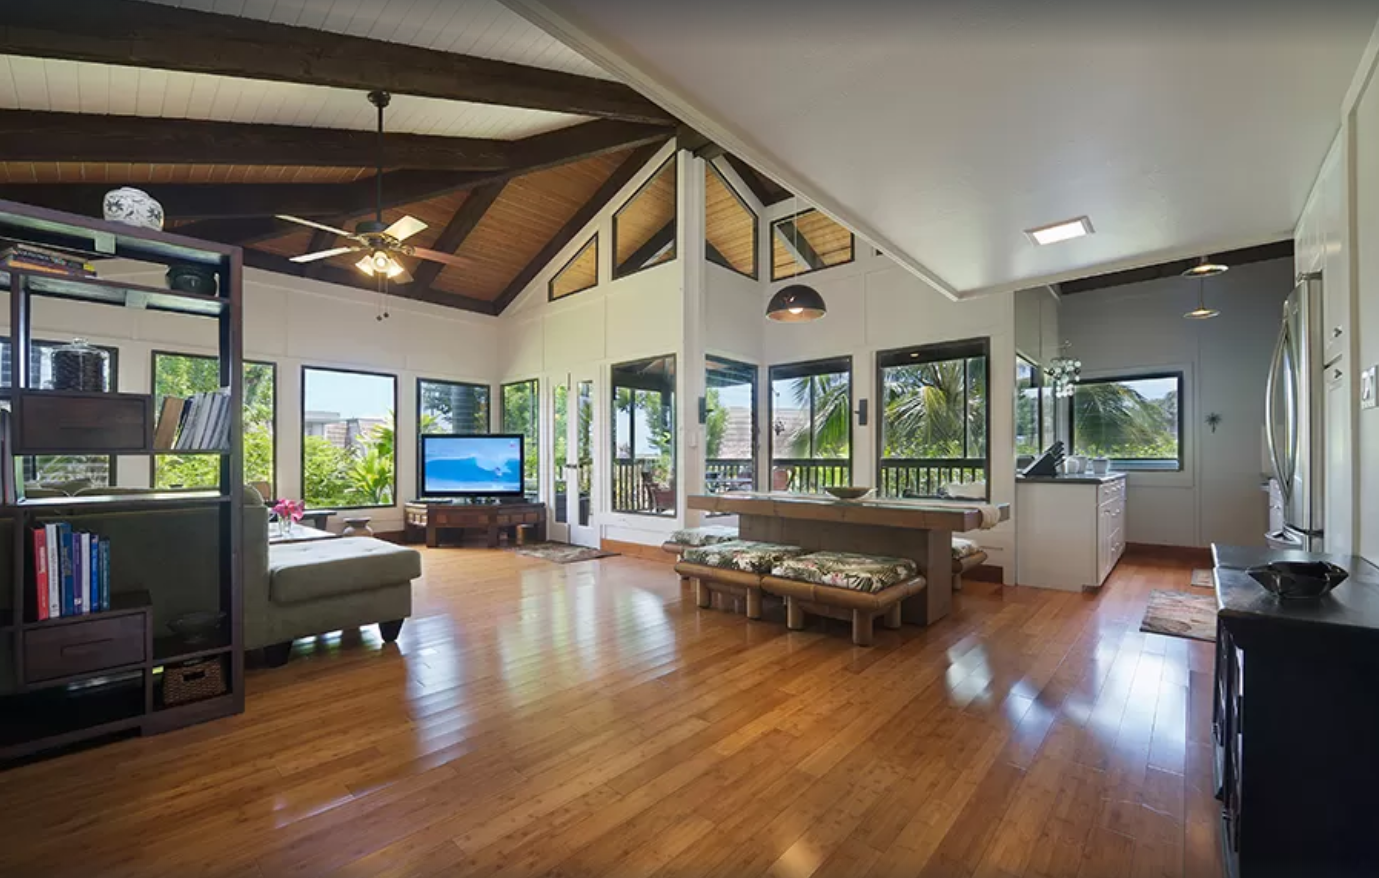 Princeville Vacation Rentals, Mauna Kai 11 - Open floor plan with vaulted ceilings in living room and kitchen